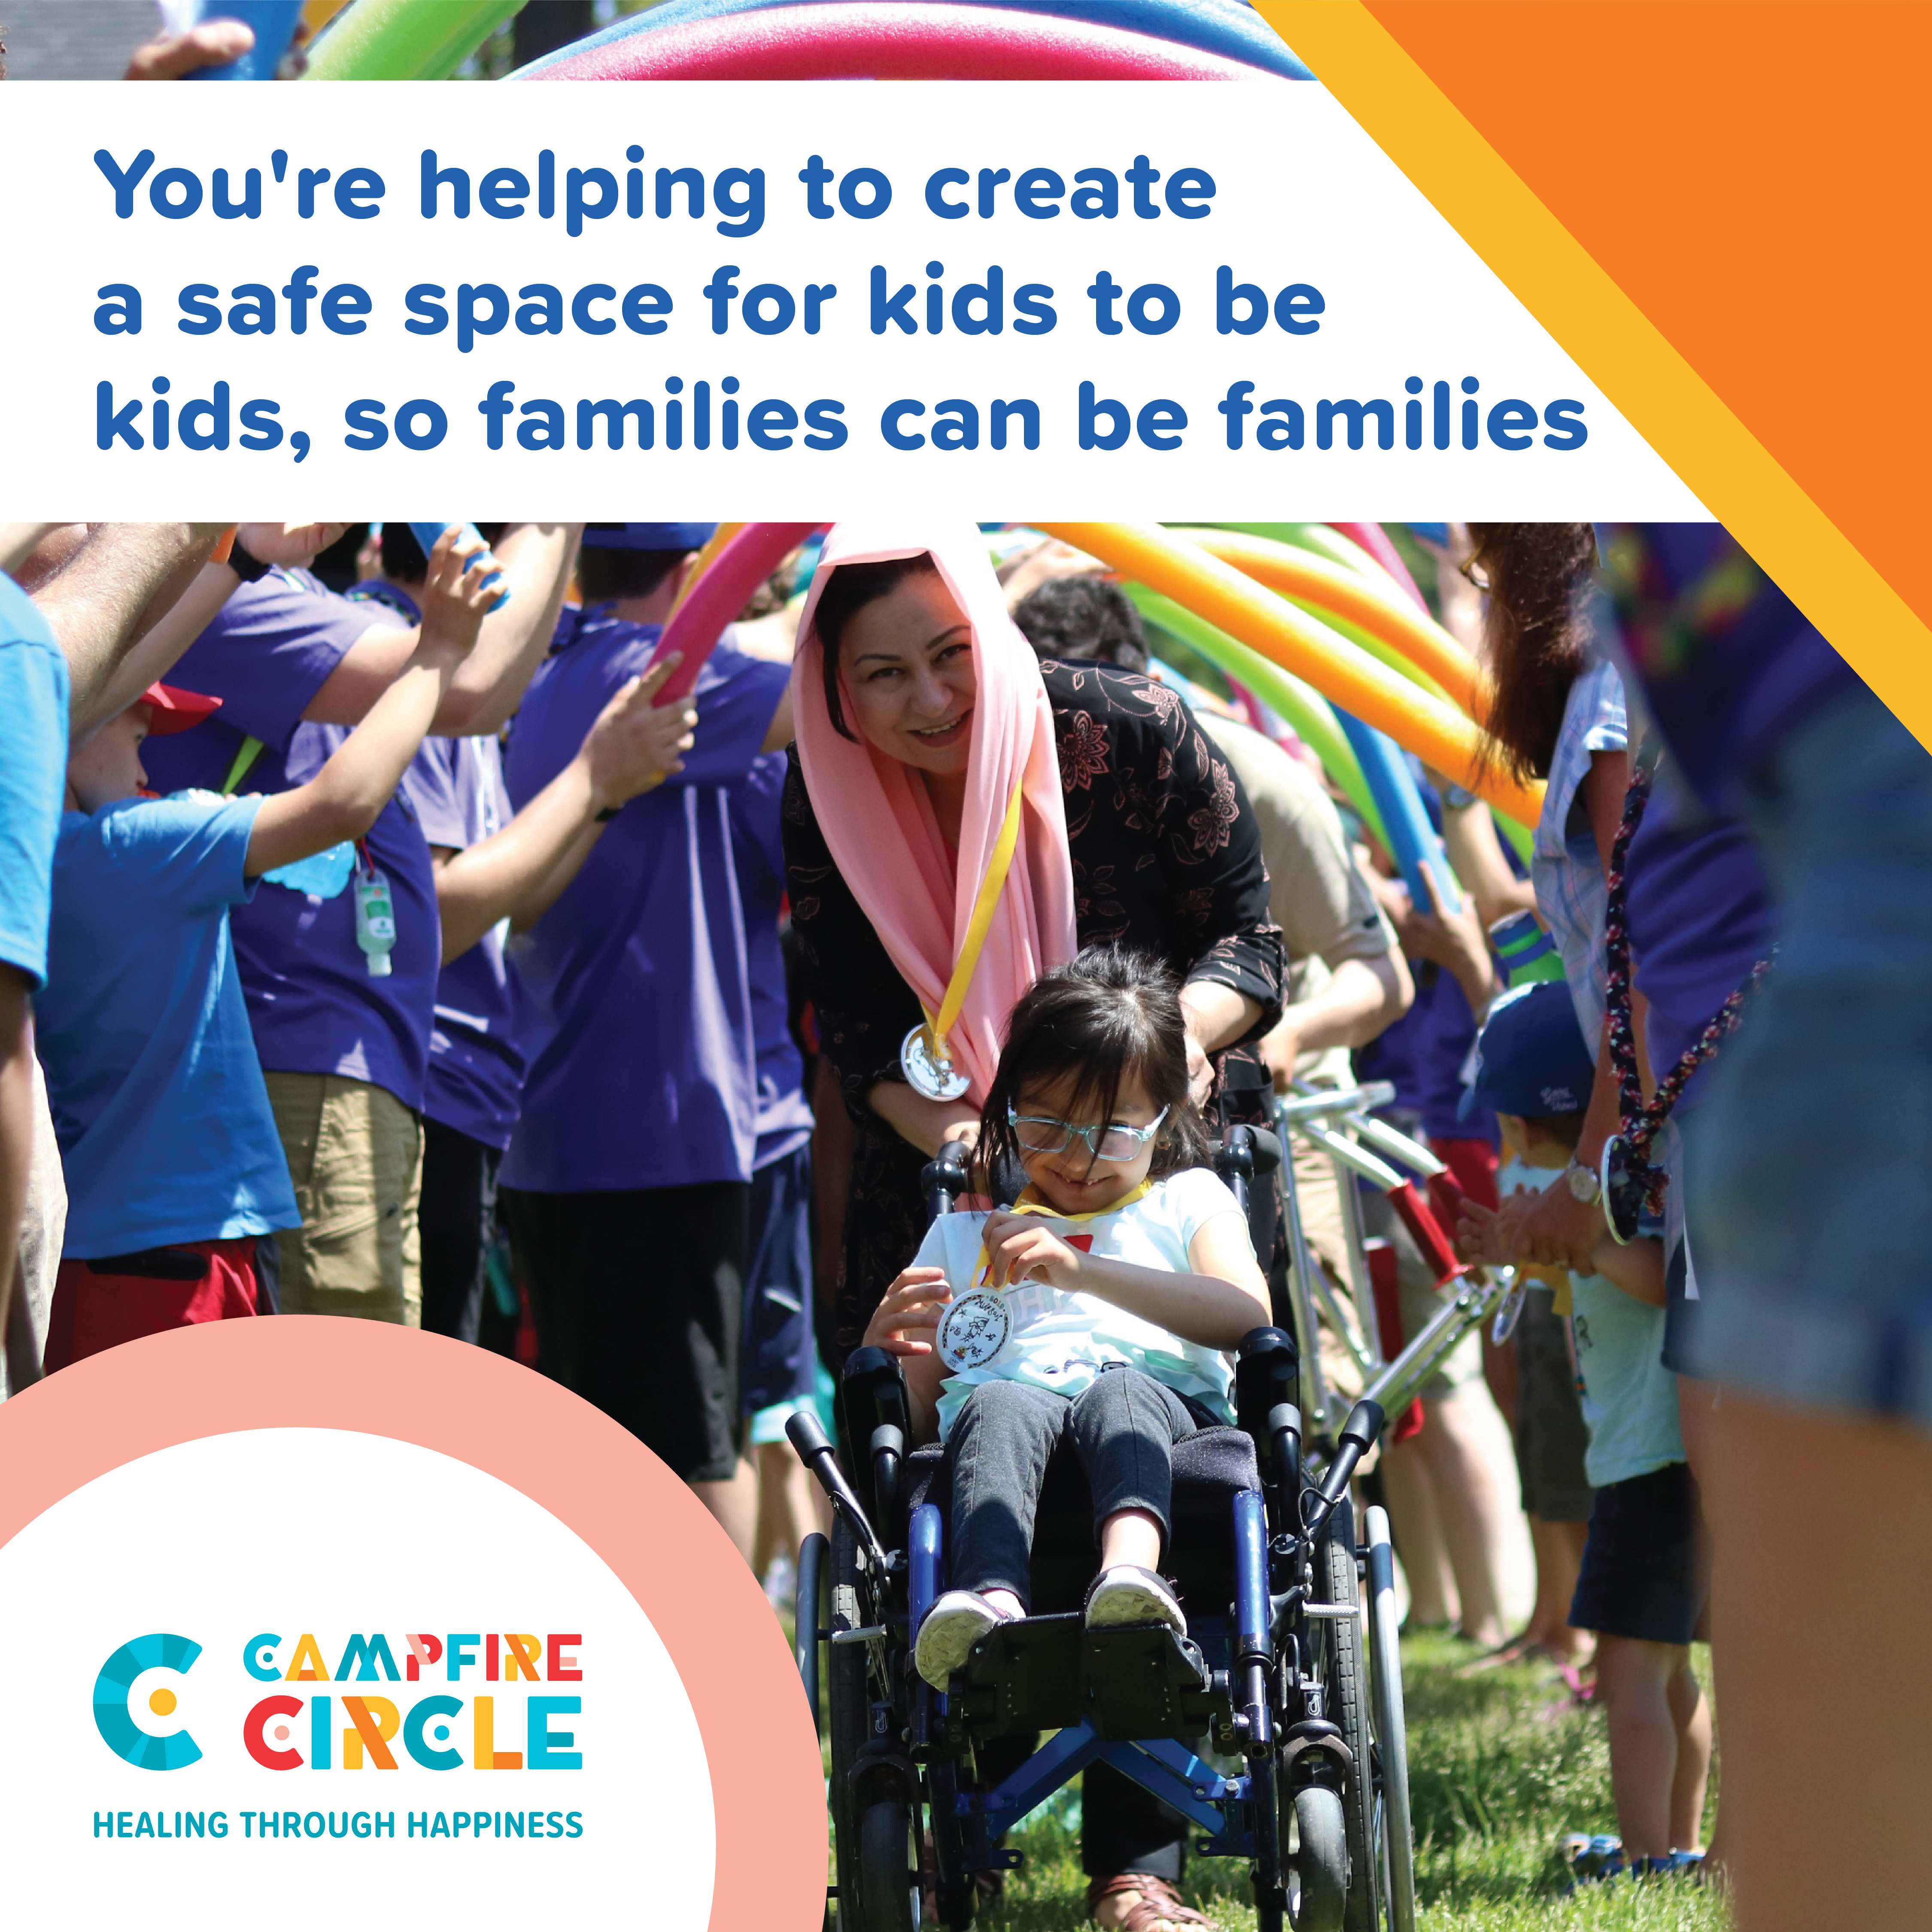 You're helping to create a safe space for kids to be kids, so families can be families